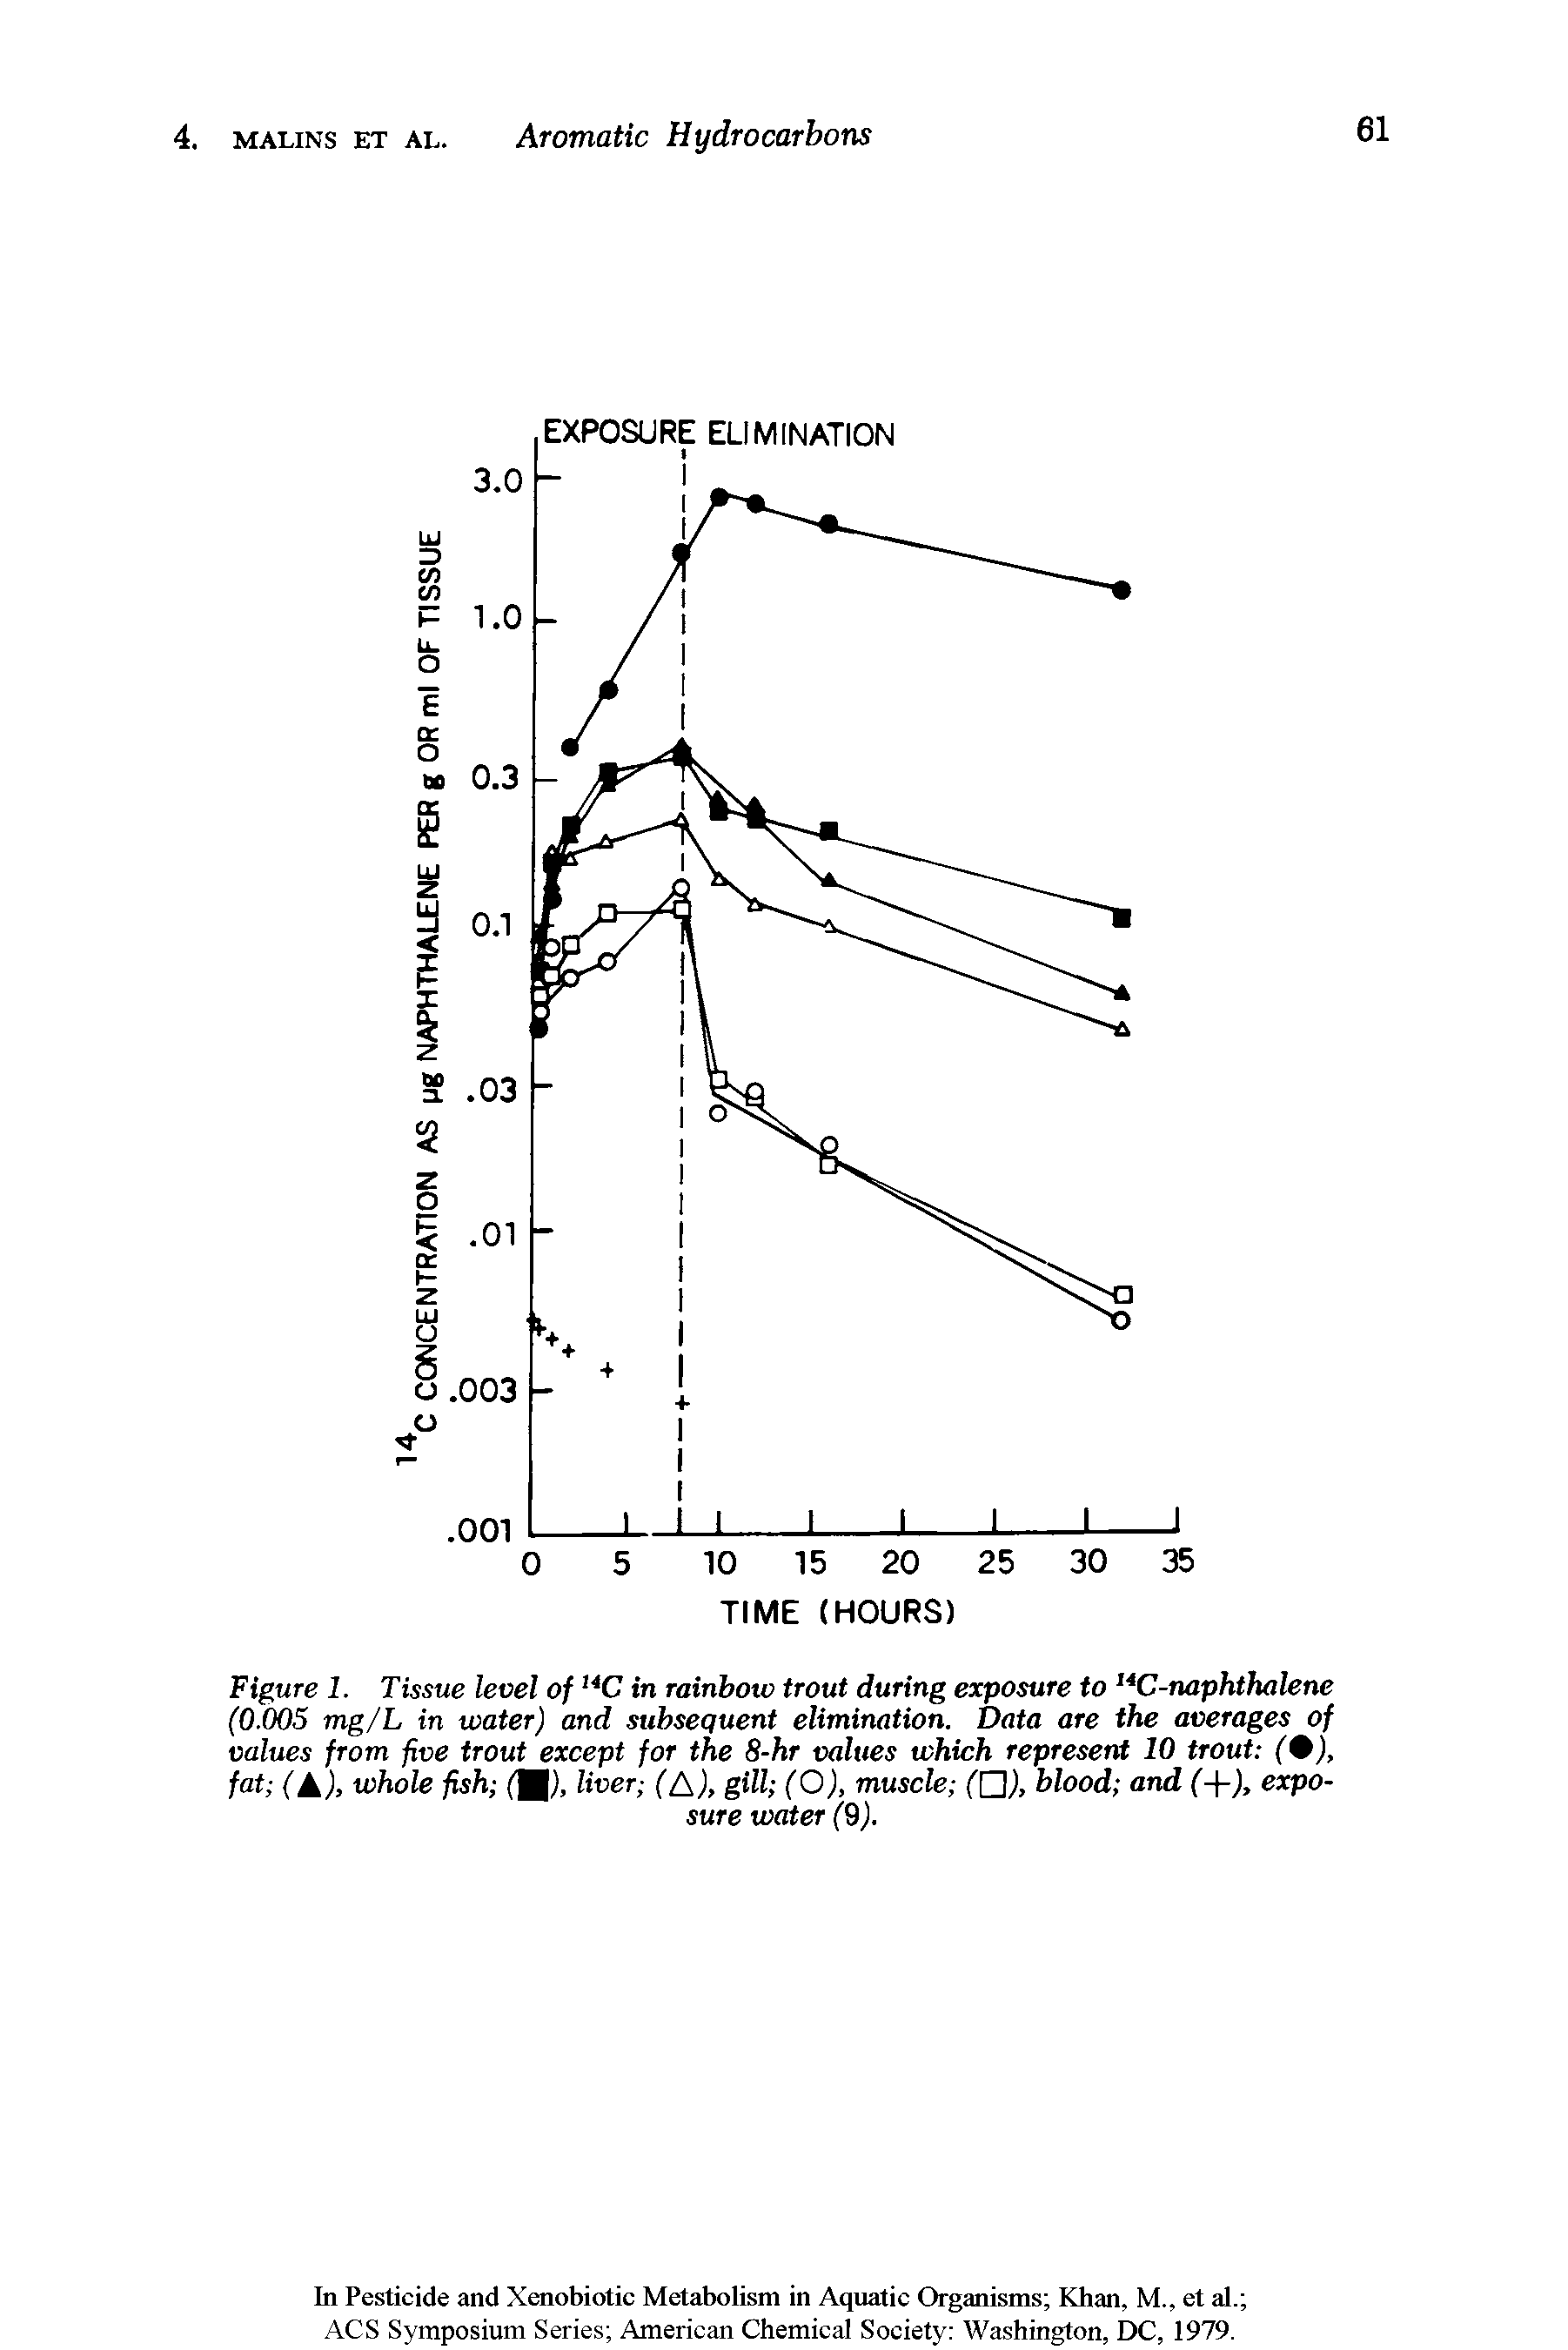 Figure 1. Tissue level of, 4C in rainbow trout during exposure to, 4C-naphthalene (0.005 mg/L in water) and subsequent elimination. Data are the averages of values from five trout except for the 8-hr values which represent 10 trout (0), fat (A), whole fish liver ( ), gill (O), muscle ([J), blood and ( ), expo-...